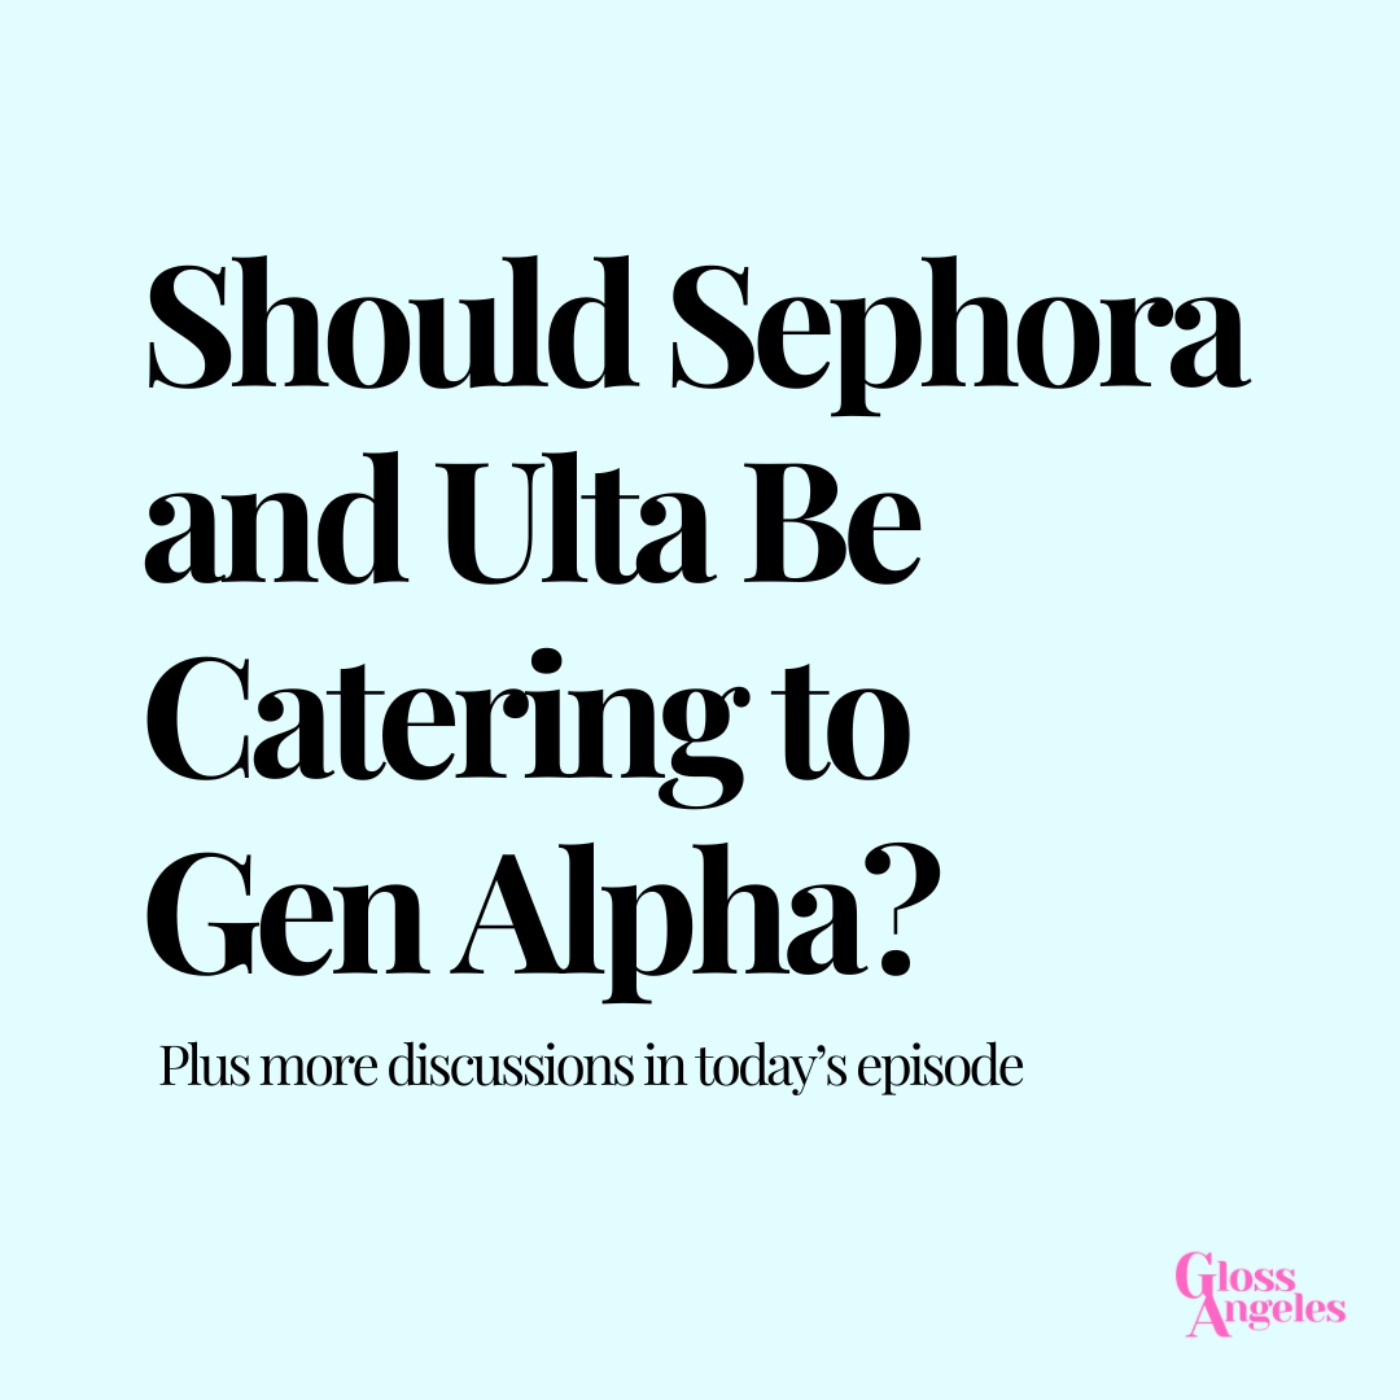 Should Sephora and Ulta Be Catering to Gen Alpha?